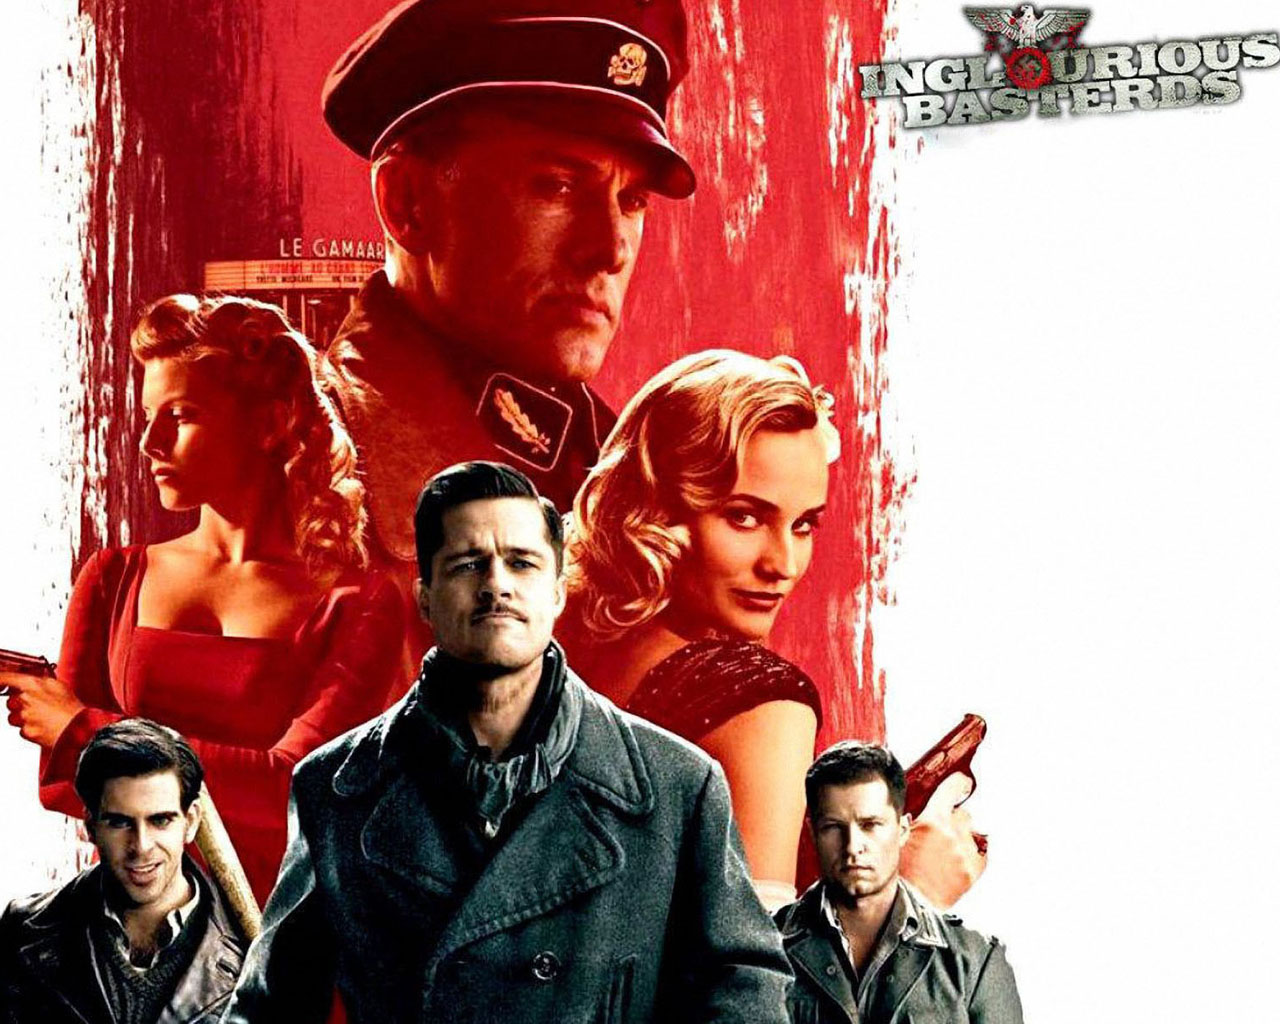 Inglourious Basterds9 1280x1024 Wallpapers, 1280x1024 Wallpapers